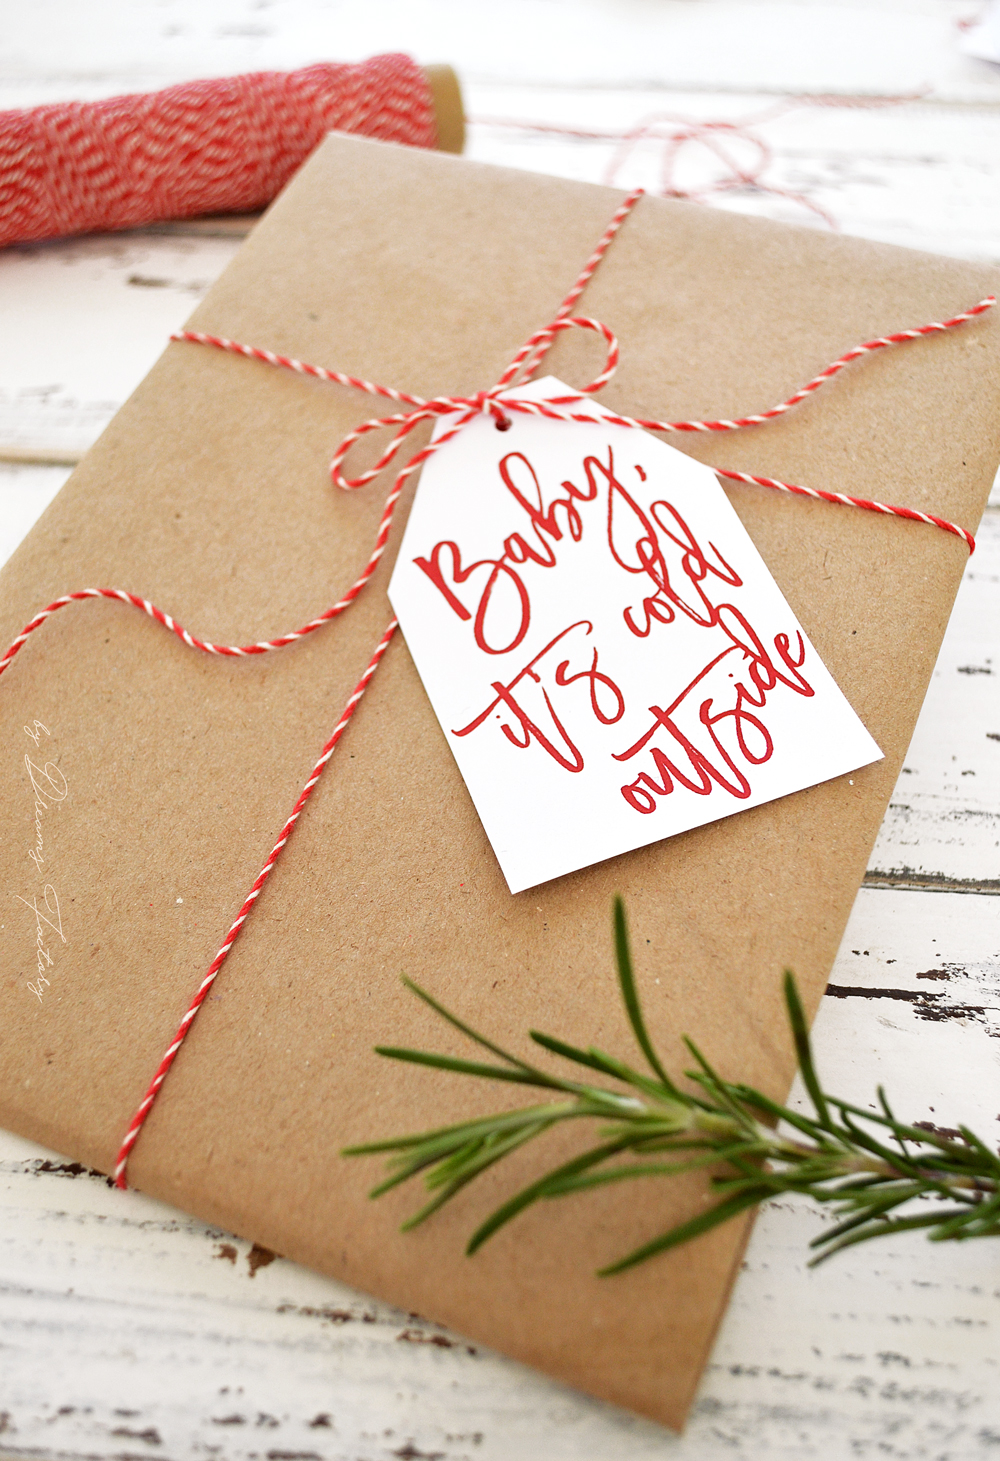 Free printable Christmas gift tags - a simple but beautiful last minute touch you need to add to your Christmas presents this year | by Dreams Factory @bydreamsfactory